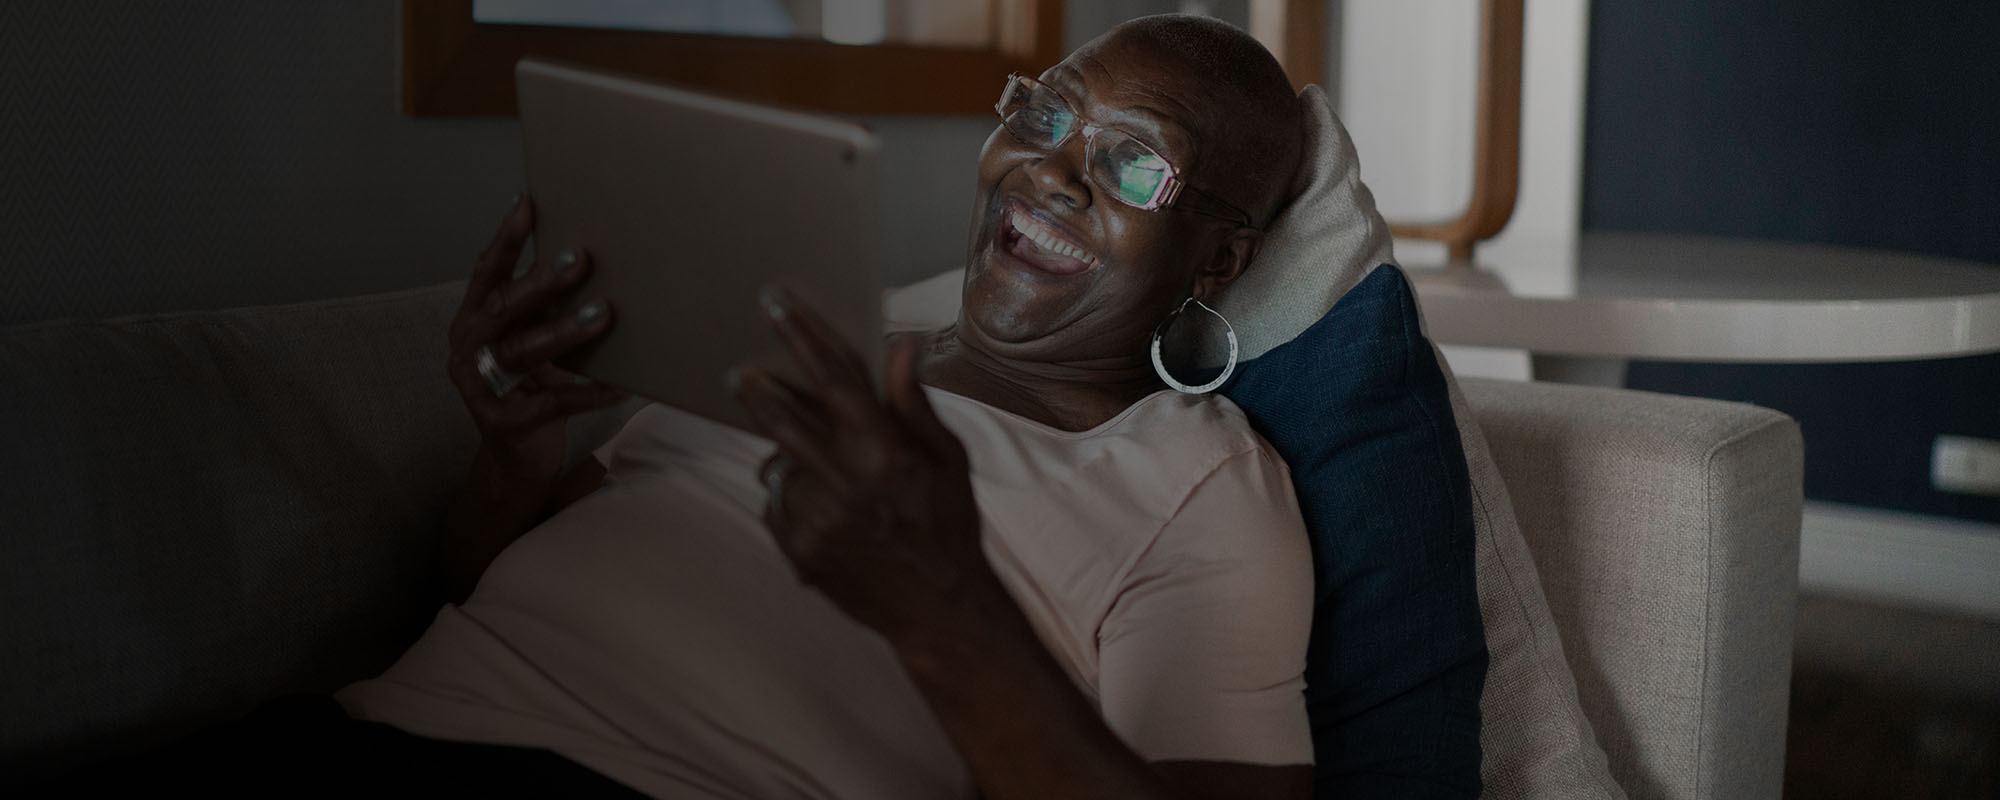 Woman reclining on couch laughing at something on her ipad